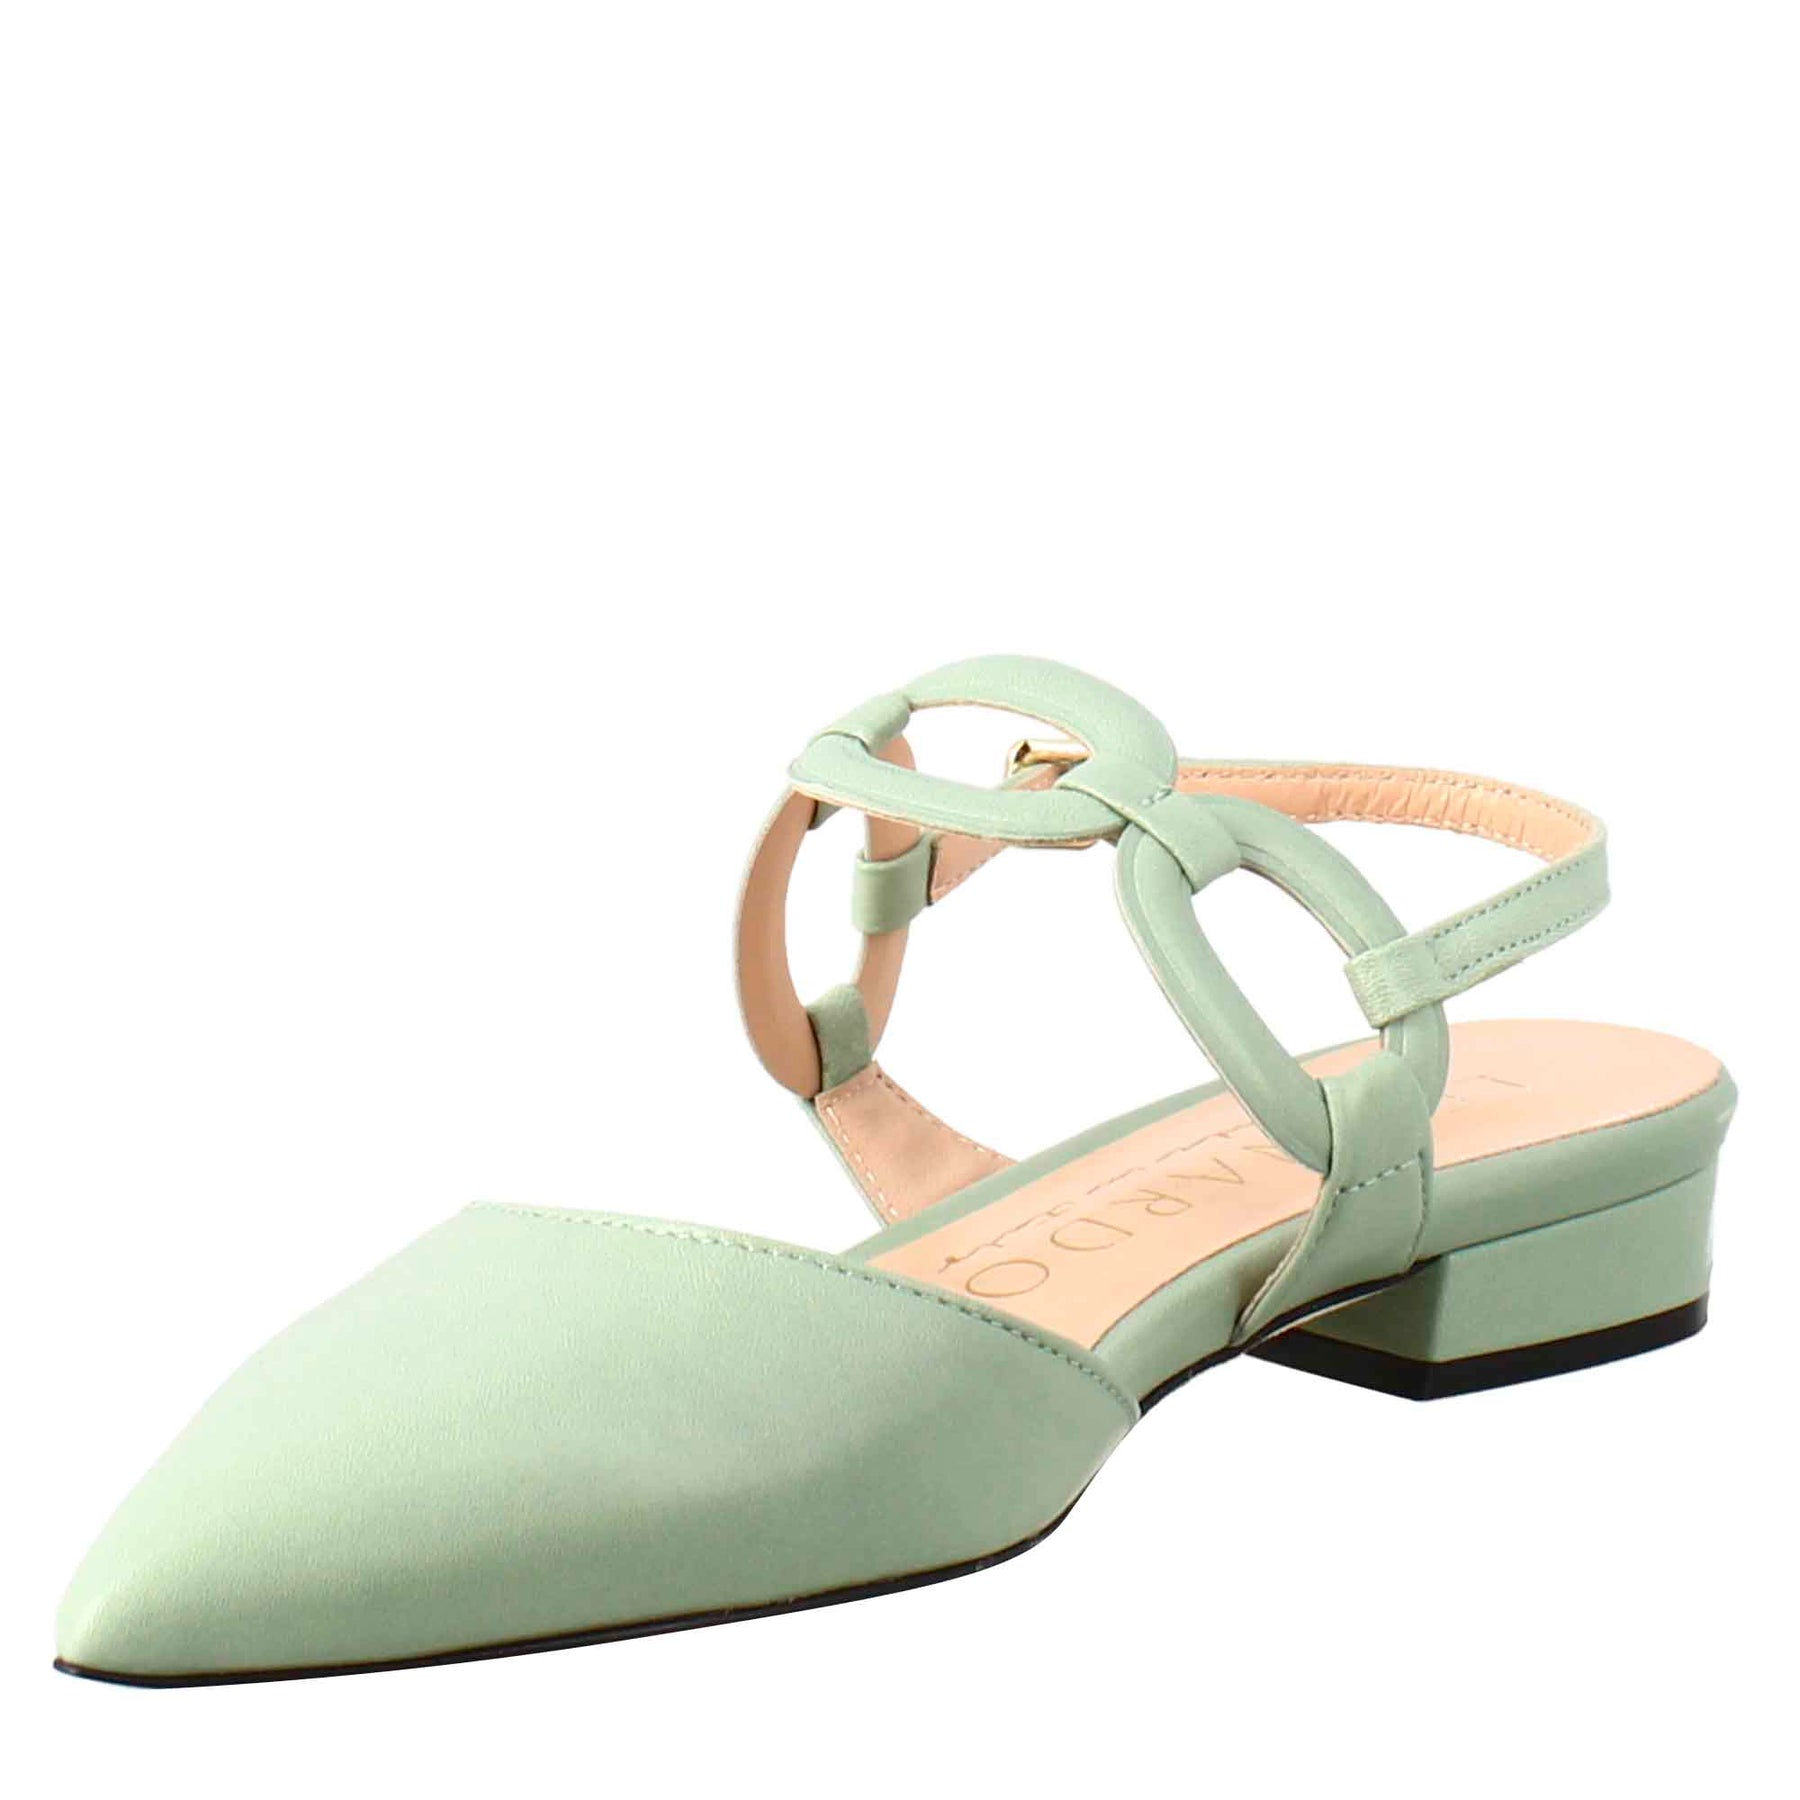 Woman's pointed toe medium heel closed sandal in green leather